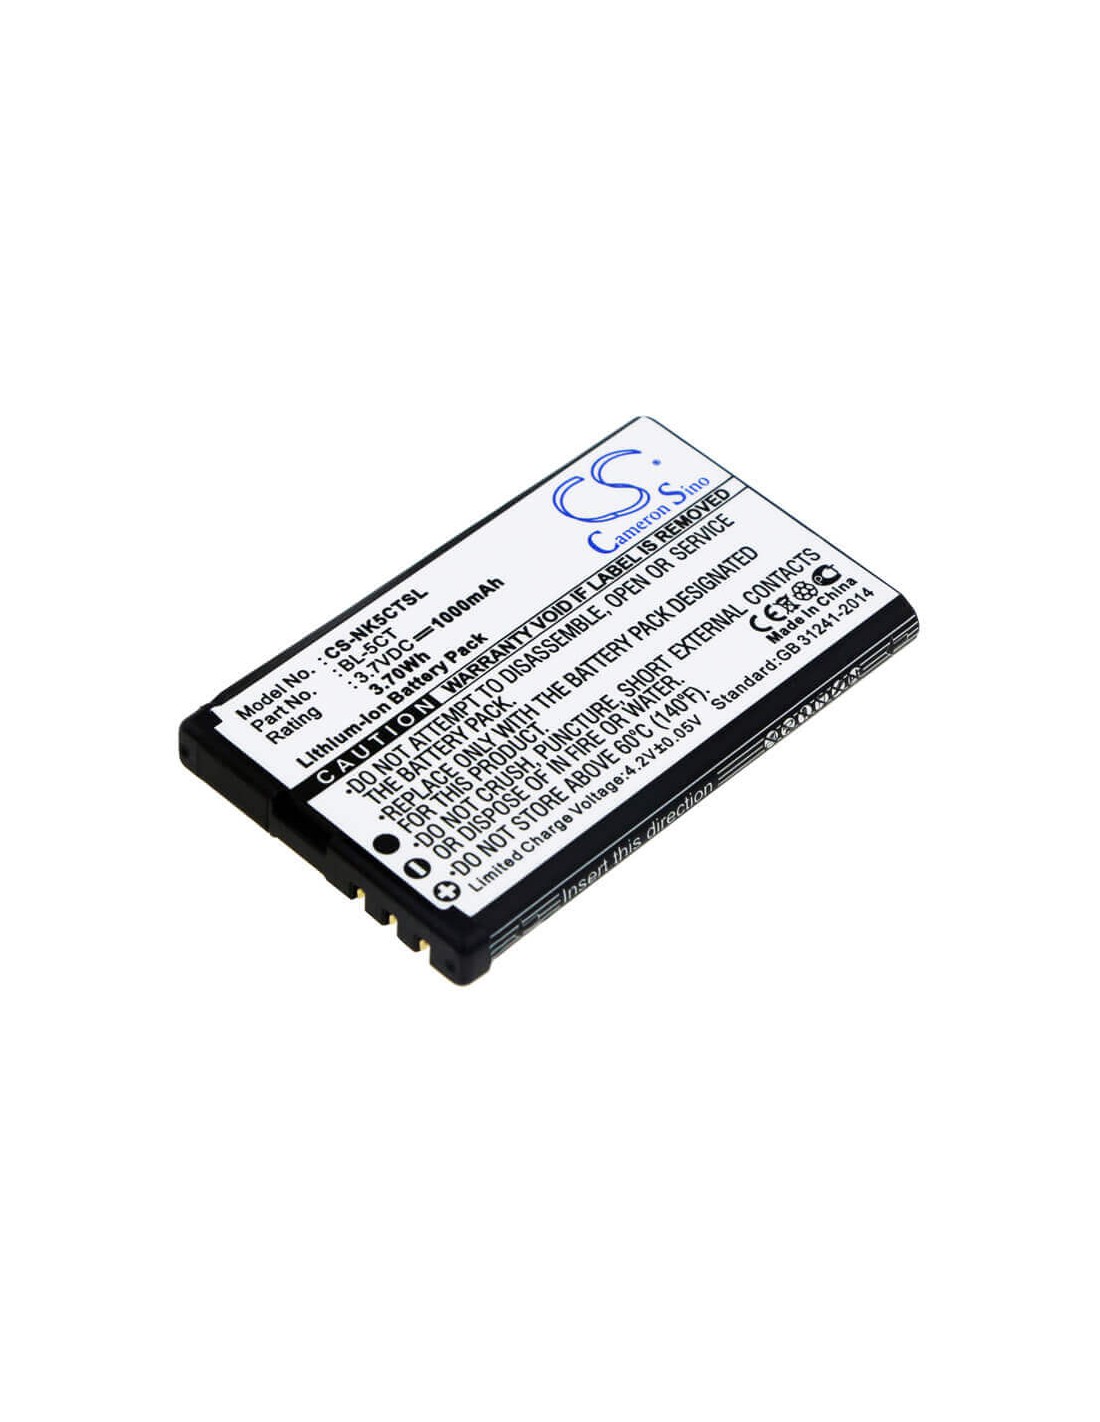 Battery for Nokia 5220 XpressMusic, 6730, 6303 classic 3.7V, 1000mAh - 3.70Wh